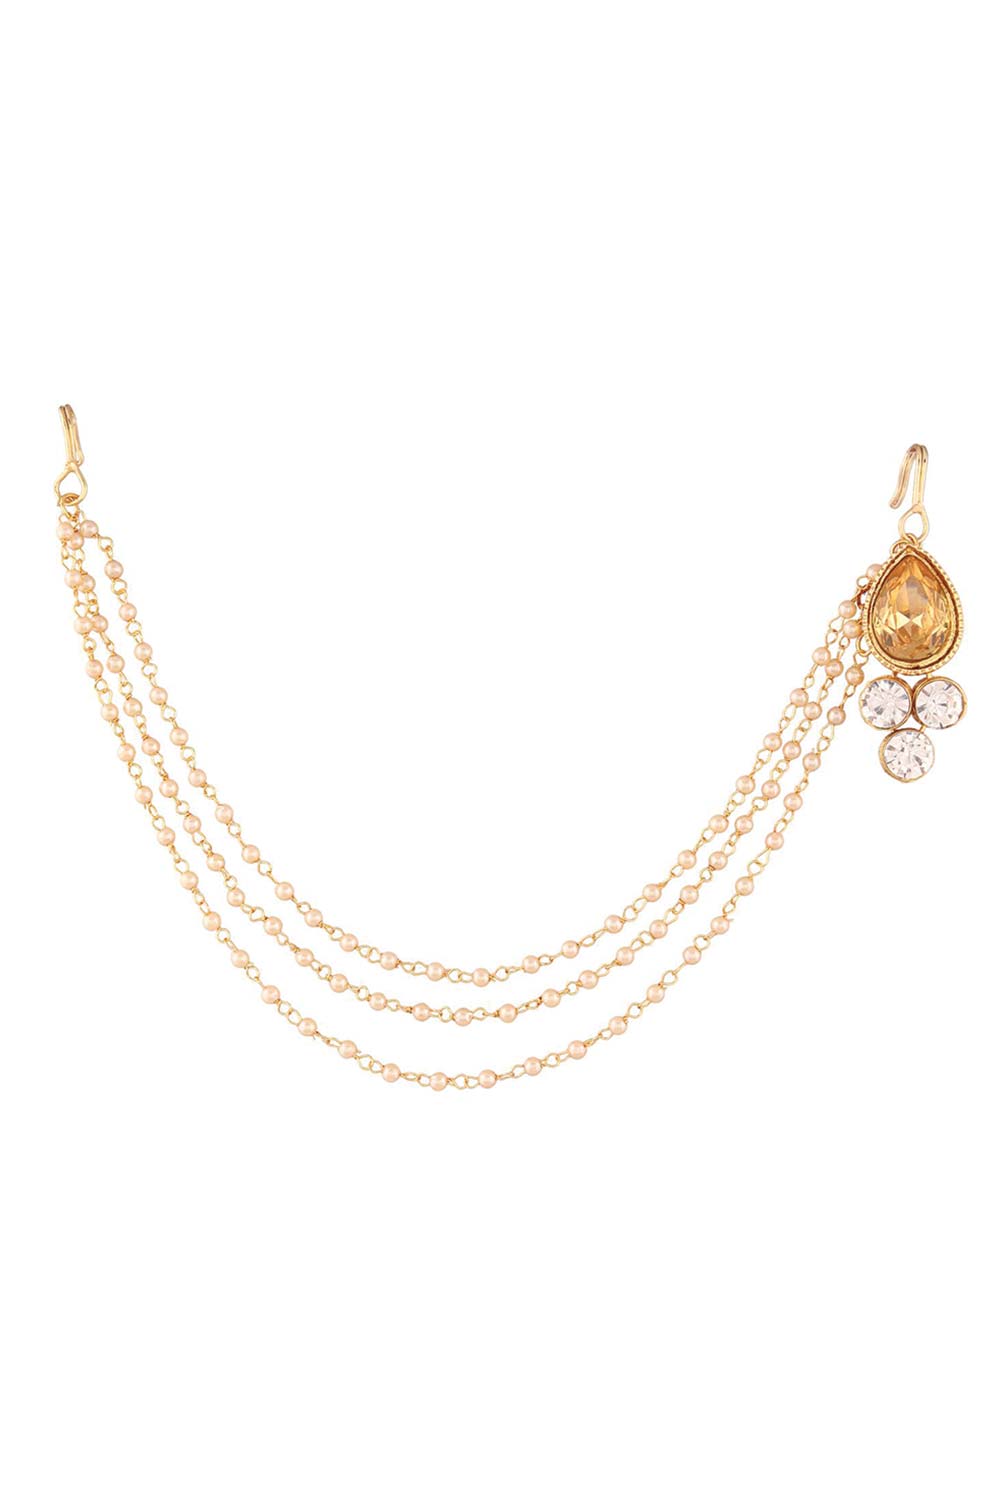 Gold Plated Mathapati And Maang Tikka with Pearl Chain